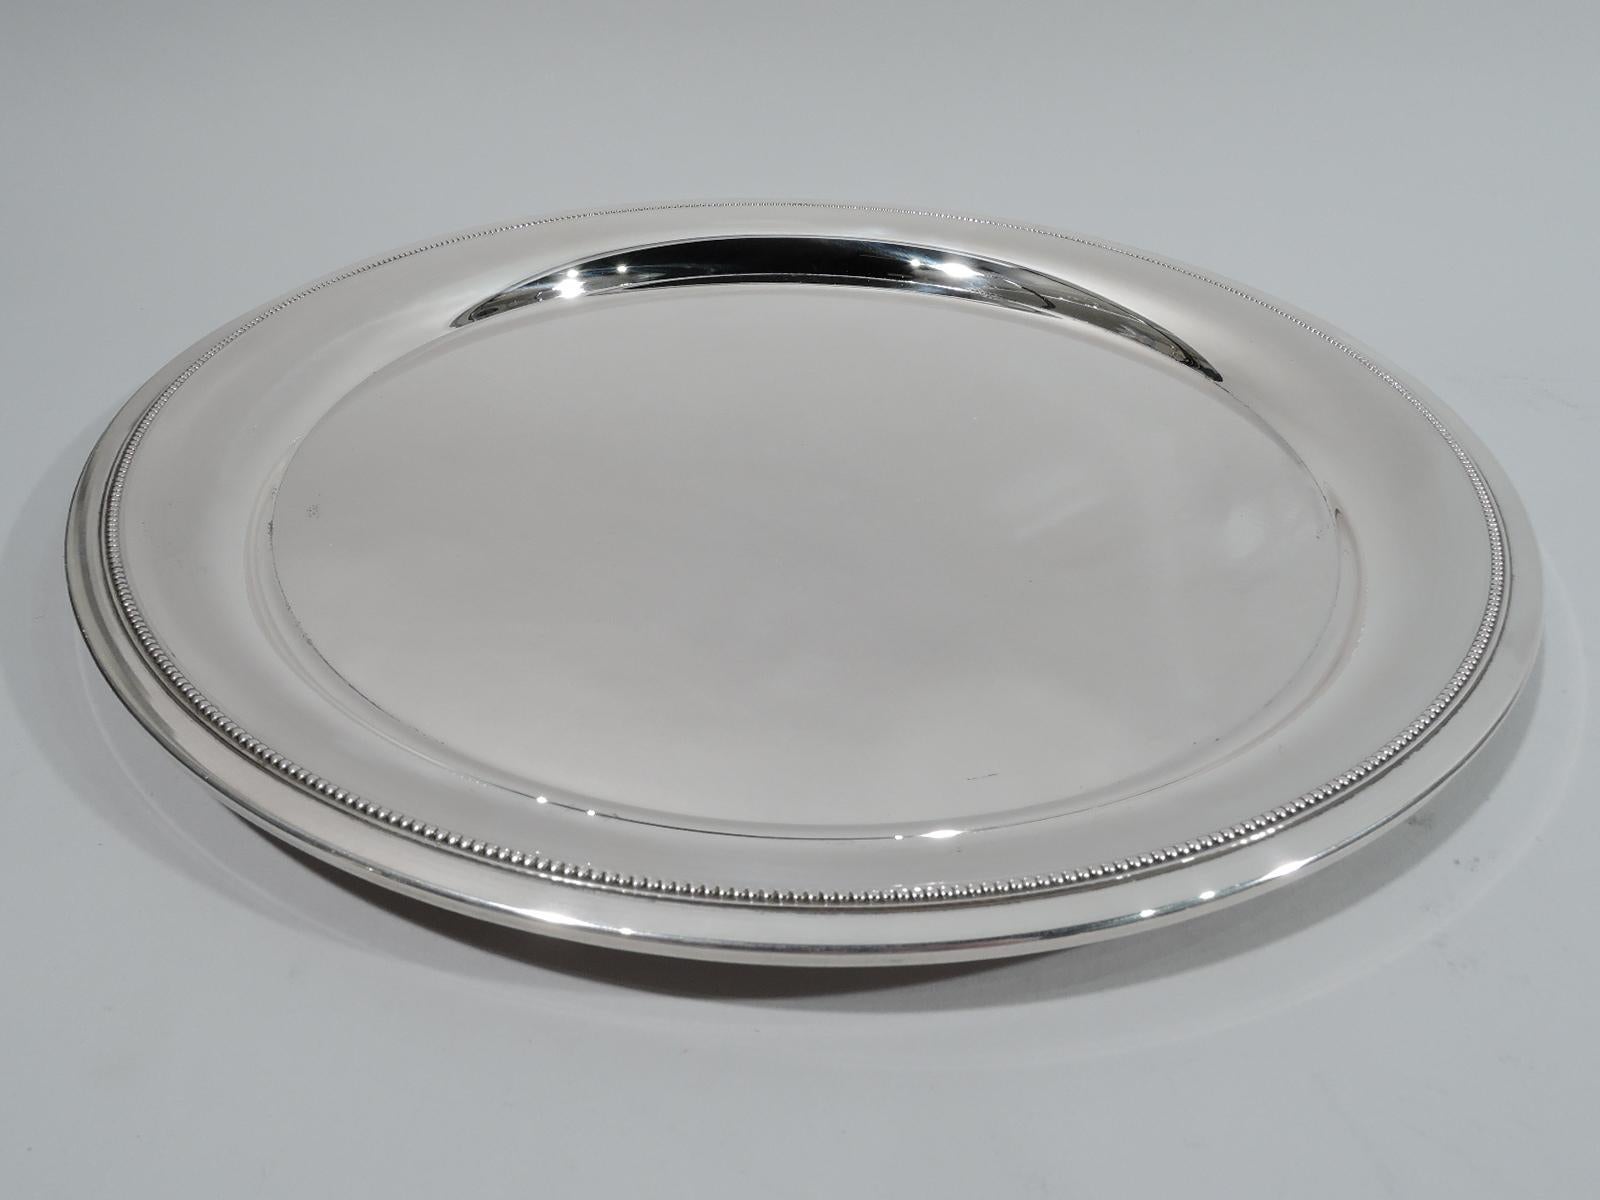 Mid-Century Modern Classical sterling silver tray. Made by Tiffany & Co. in New York. Round with deep well. Rim has finely beaded border. Fully marked including postwar pattern no. 23501. Weight: 22 troy ounces.